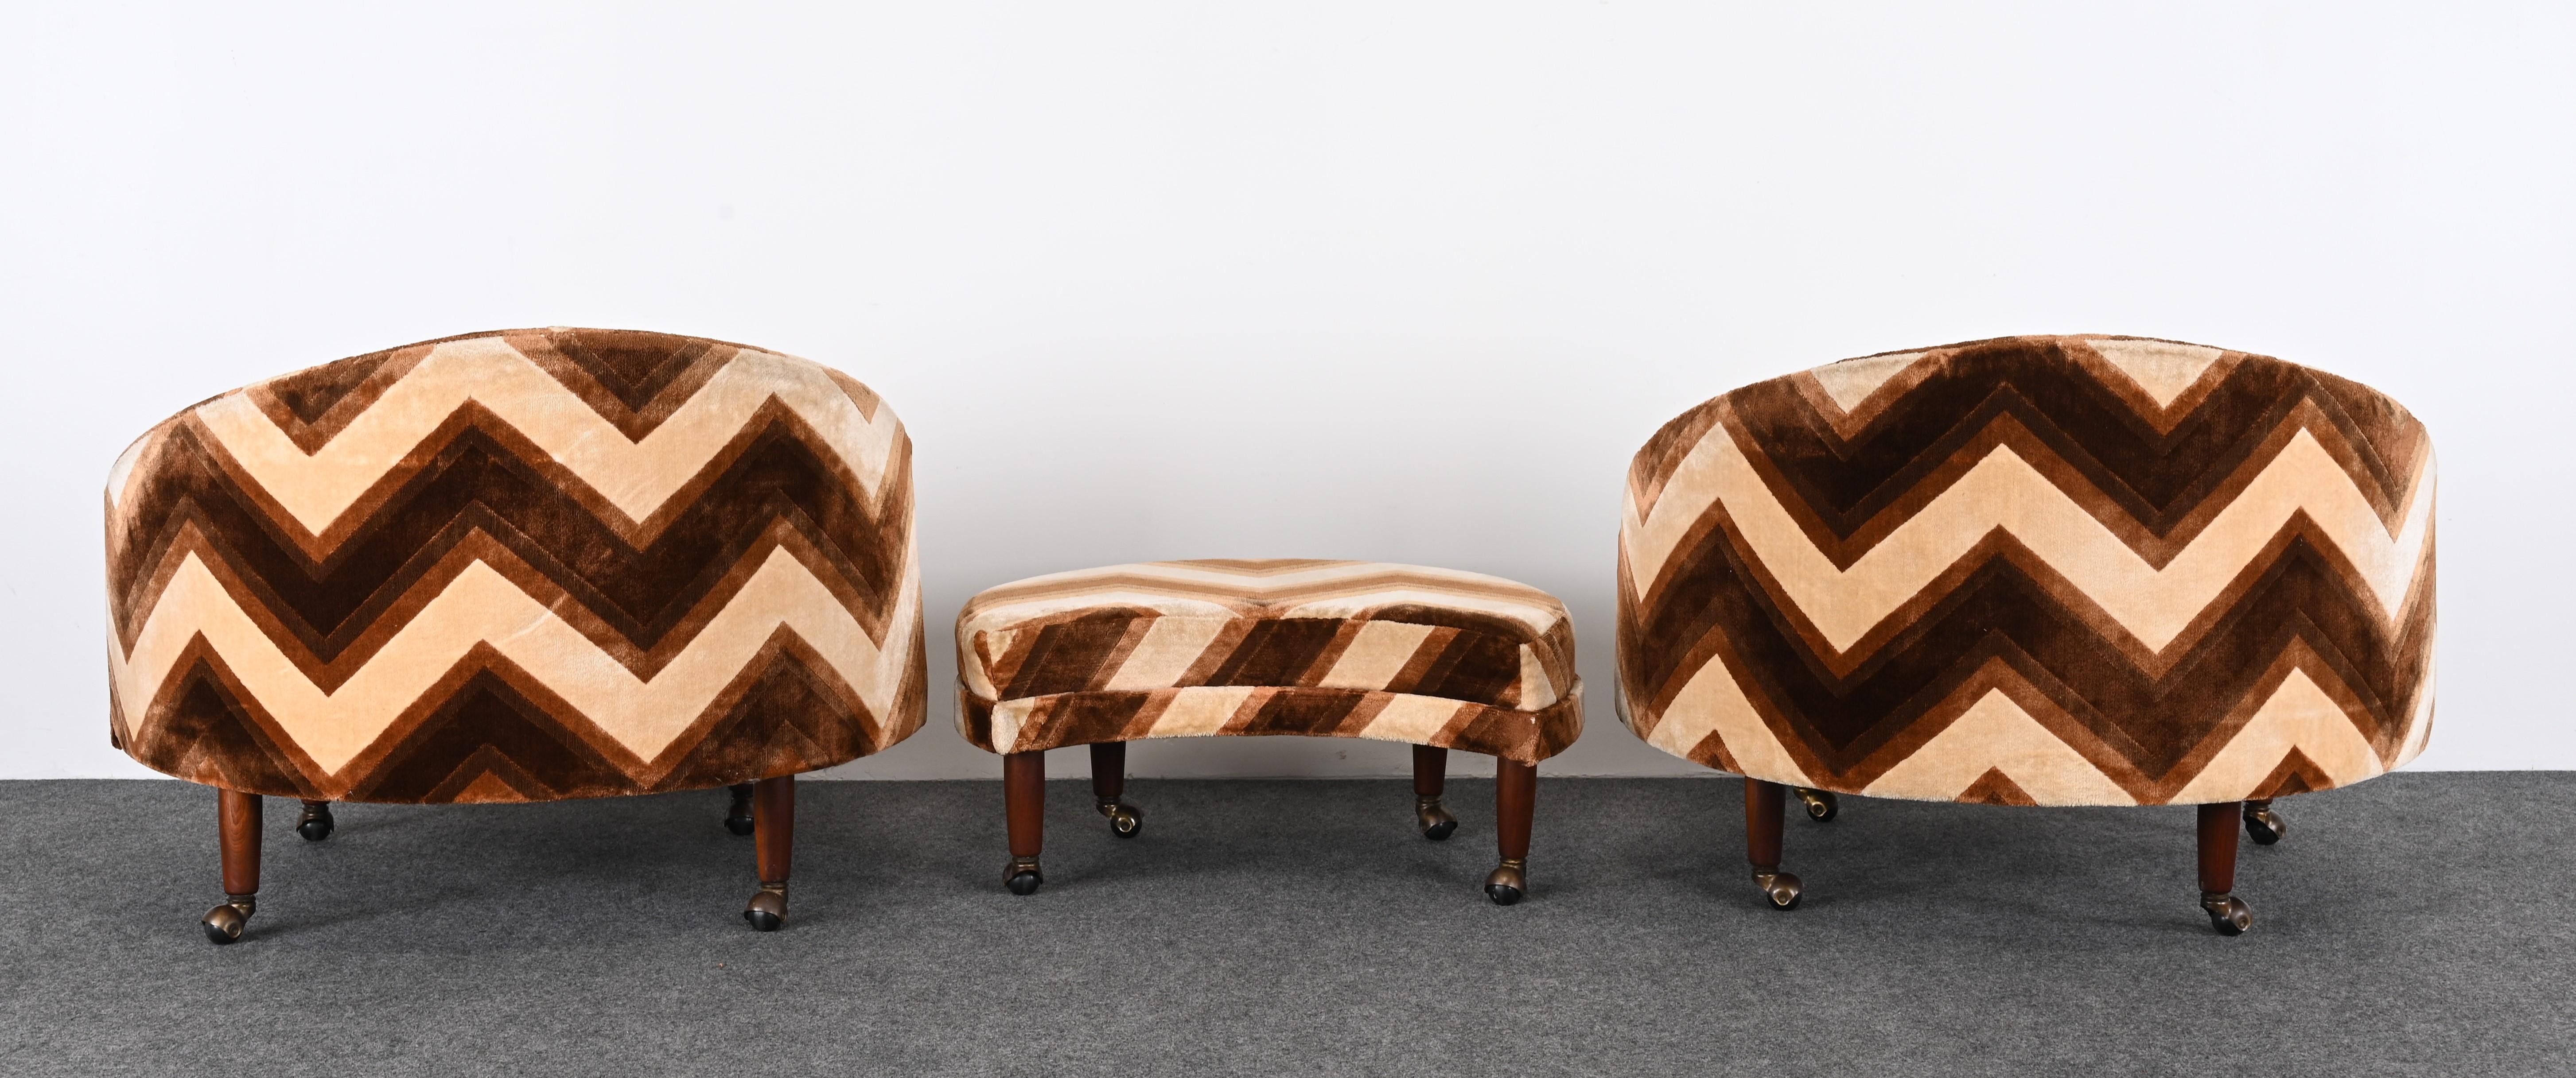 Pair of Adrian Pearsall Havana Lounge Chairs and Ottoman, 1965 For Sale 8